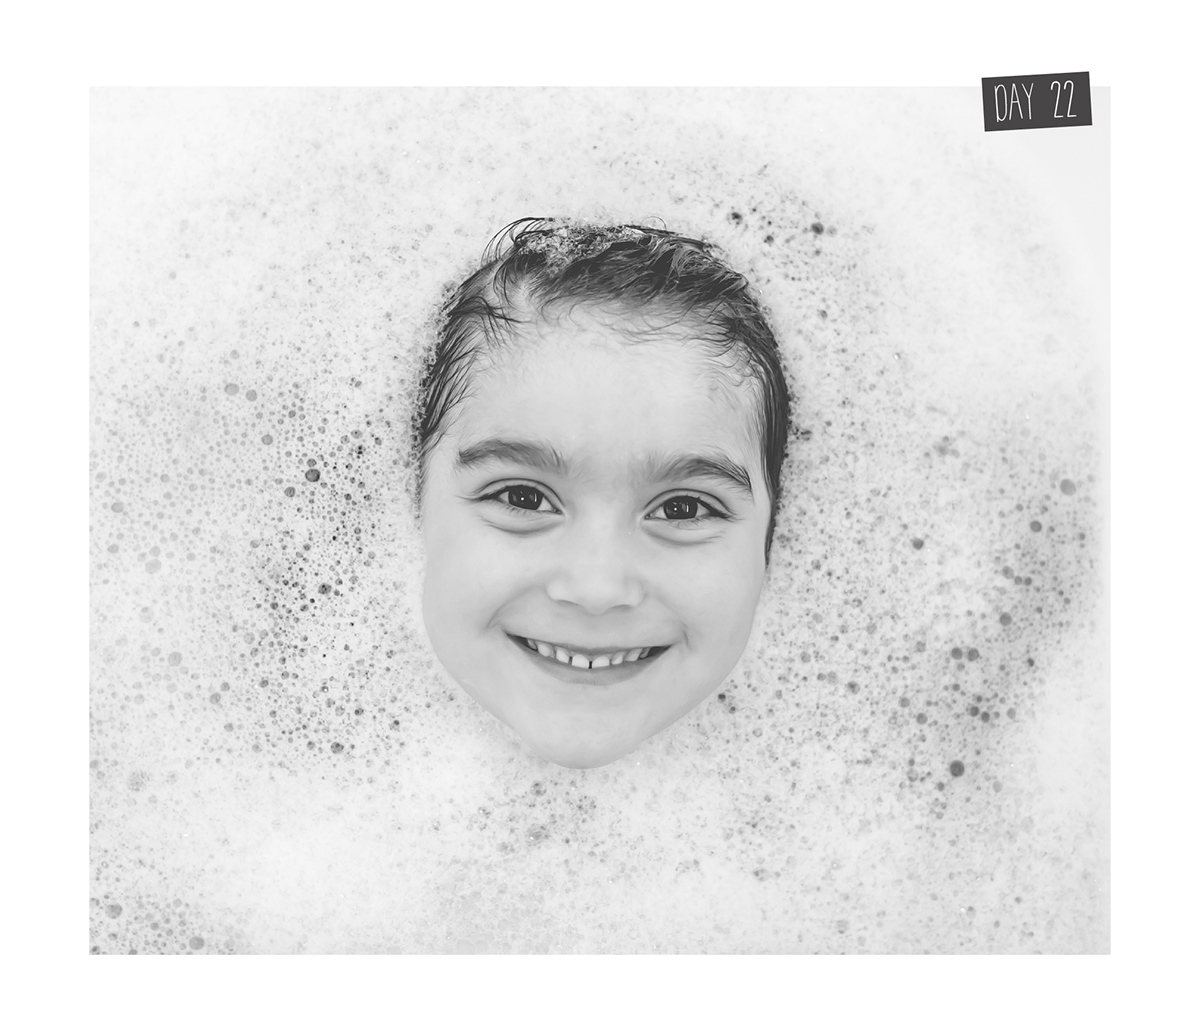 b&w photography personal photography project black and white portraits Photography Challenge Children's portraits